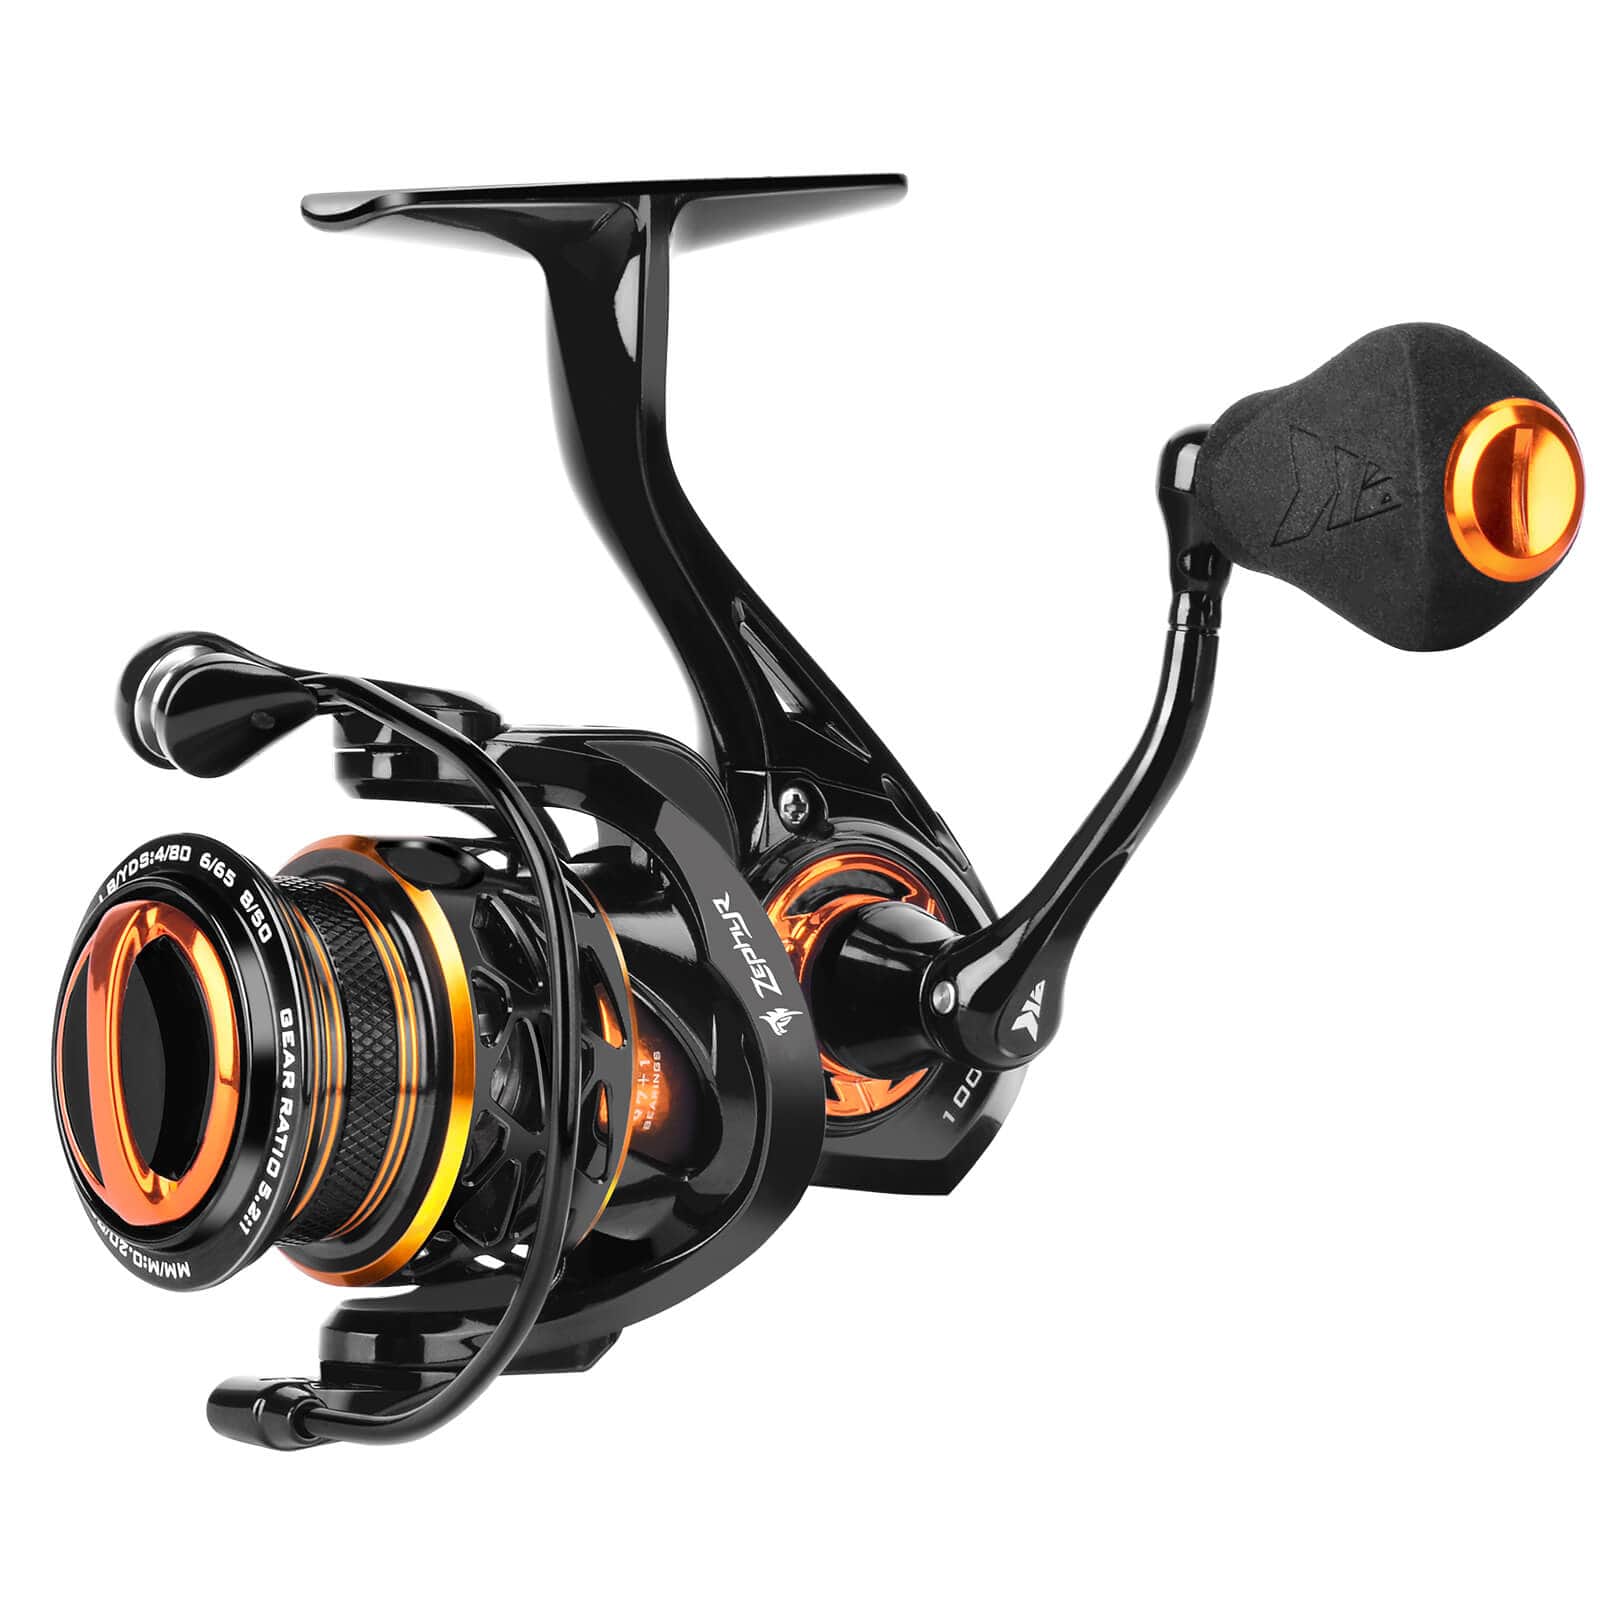 KASTKING Zephyr Spinning Reel Review: I Catch My First Ever